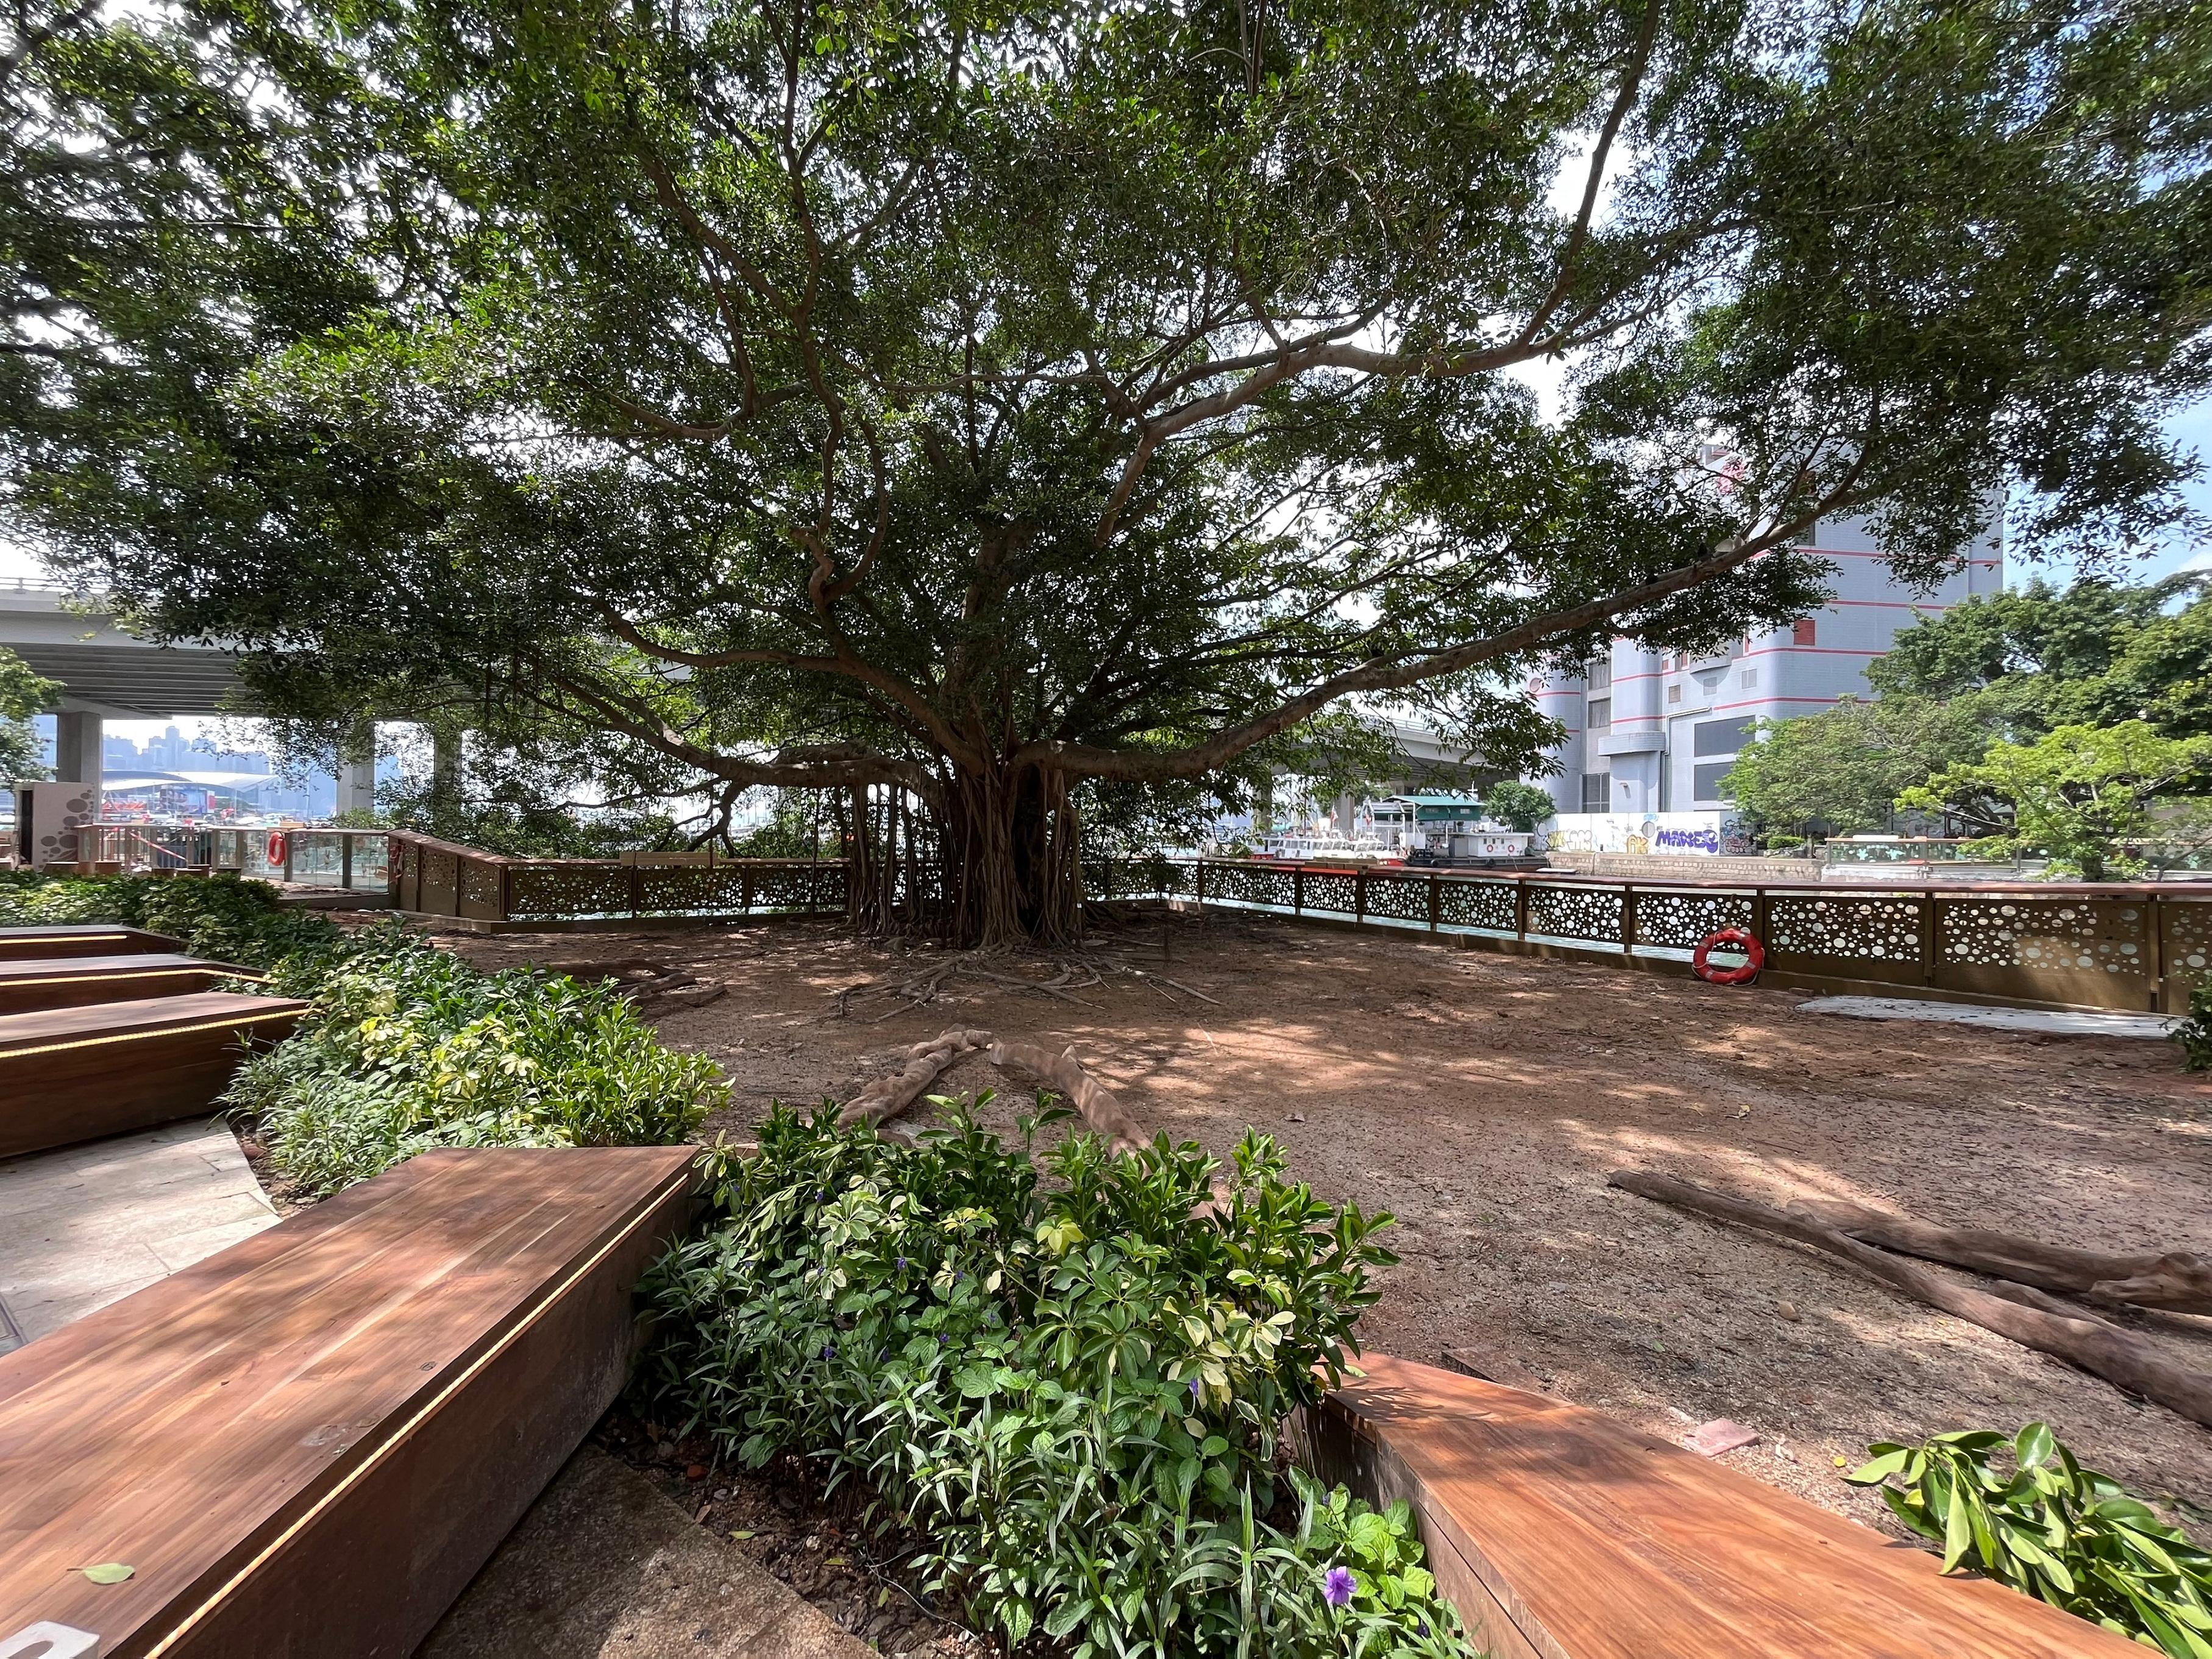 The Revitalised Typhoon Shelter Precinct at the Causeway Bay Typhoon Shelter waterfront of Victoria Park Road will be officially opened next Friday (September 9). The Precinct has beautified the 150-metre-long promenade, which was formerly known as Ah King's Slipway, with the preservation efforts of a large banyan tree nearby. More greenery, outdoor tables and chairs, as well as shading facilities will be provided.